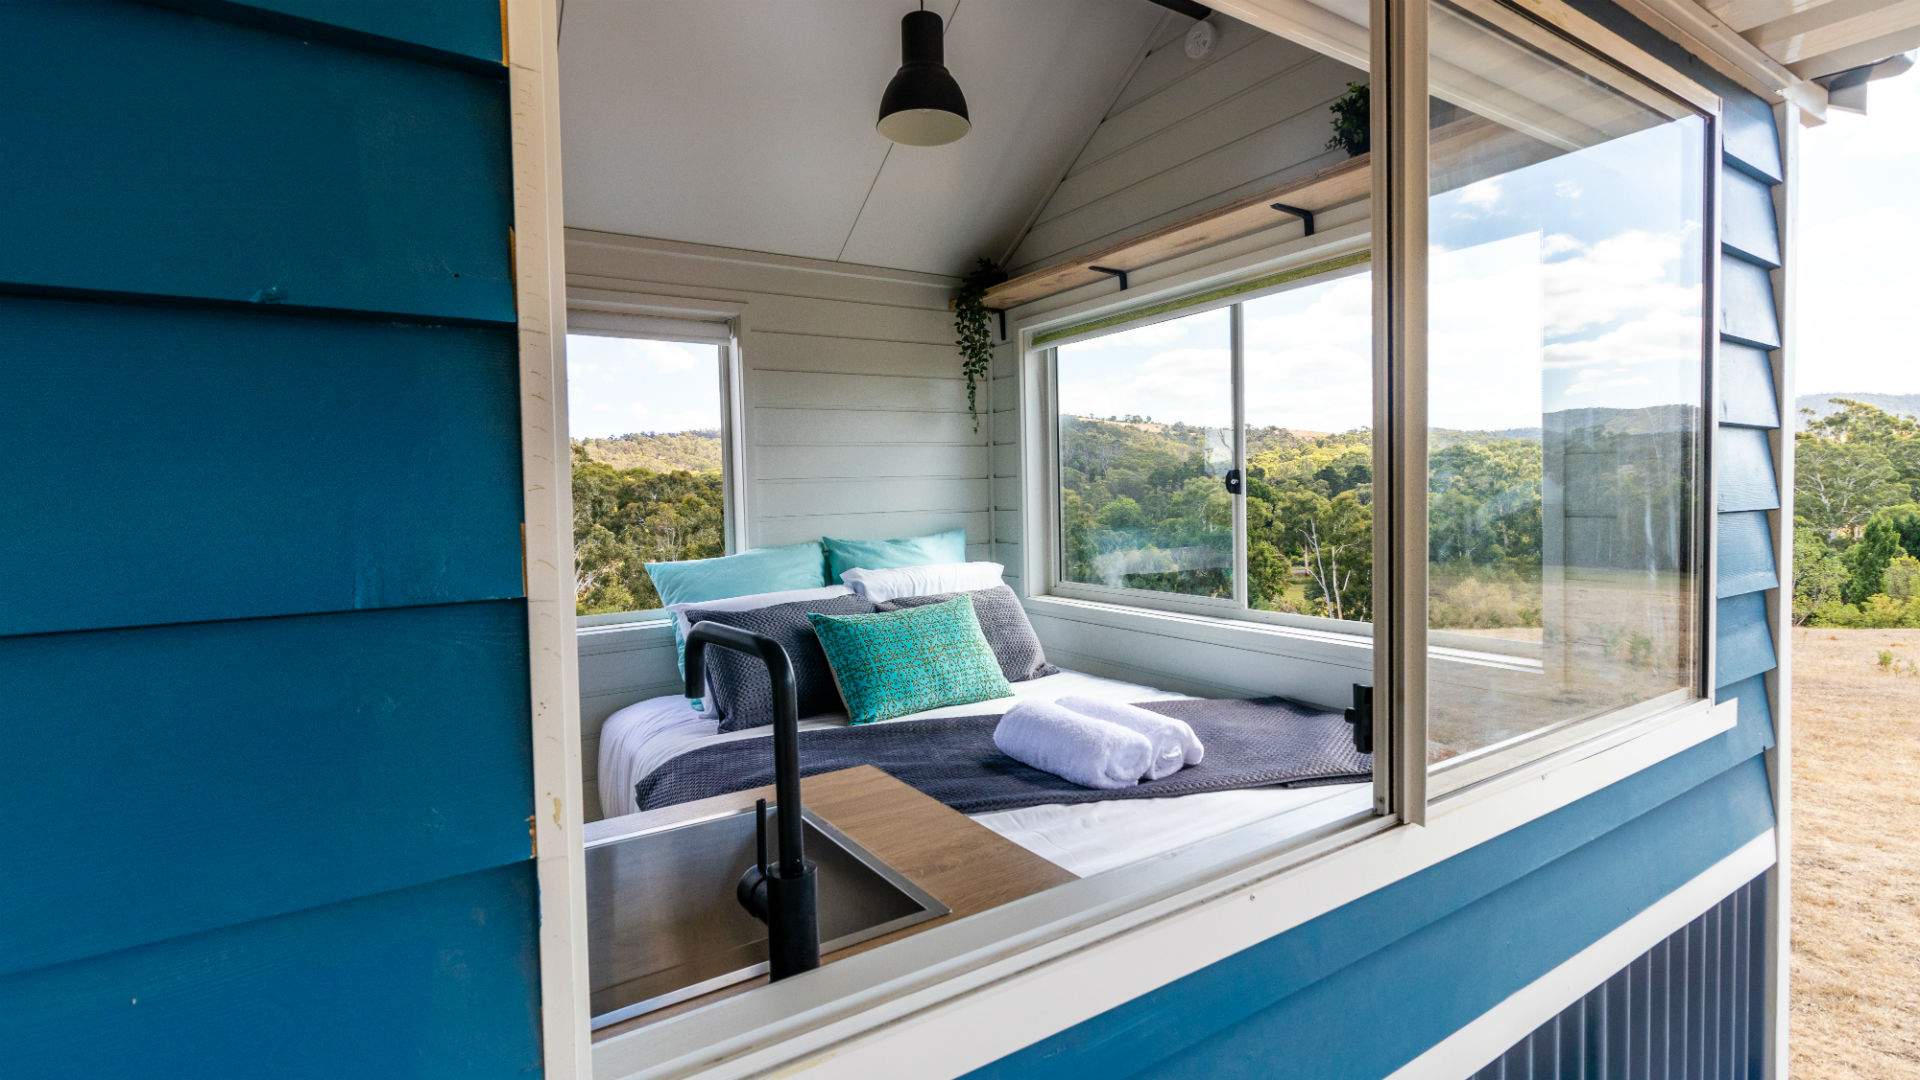 This Secluded Tiny House in the Yarra Valley Is Your New Reason to Get Out of the City